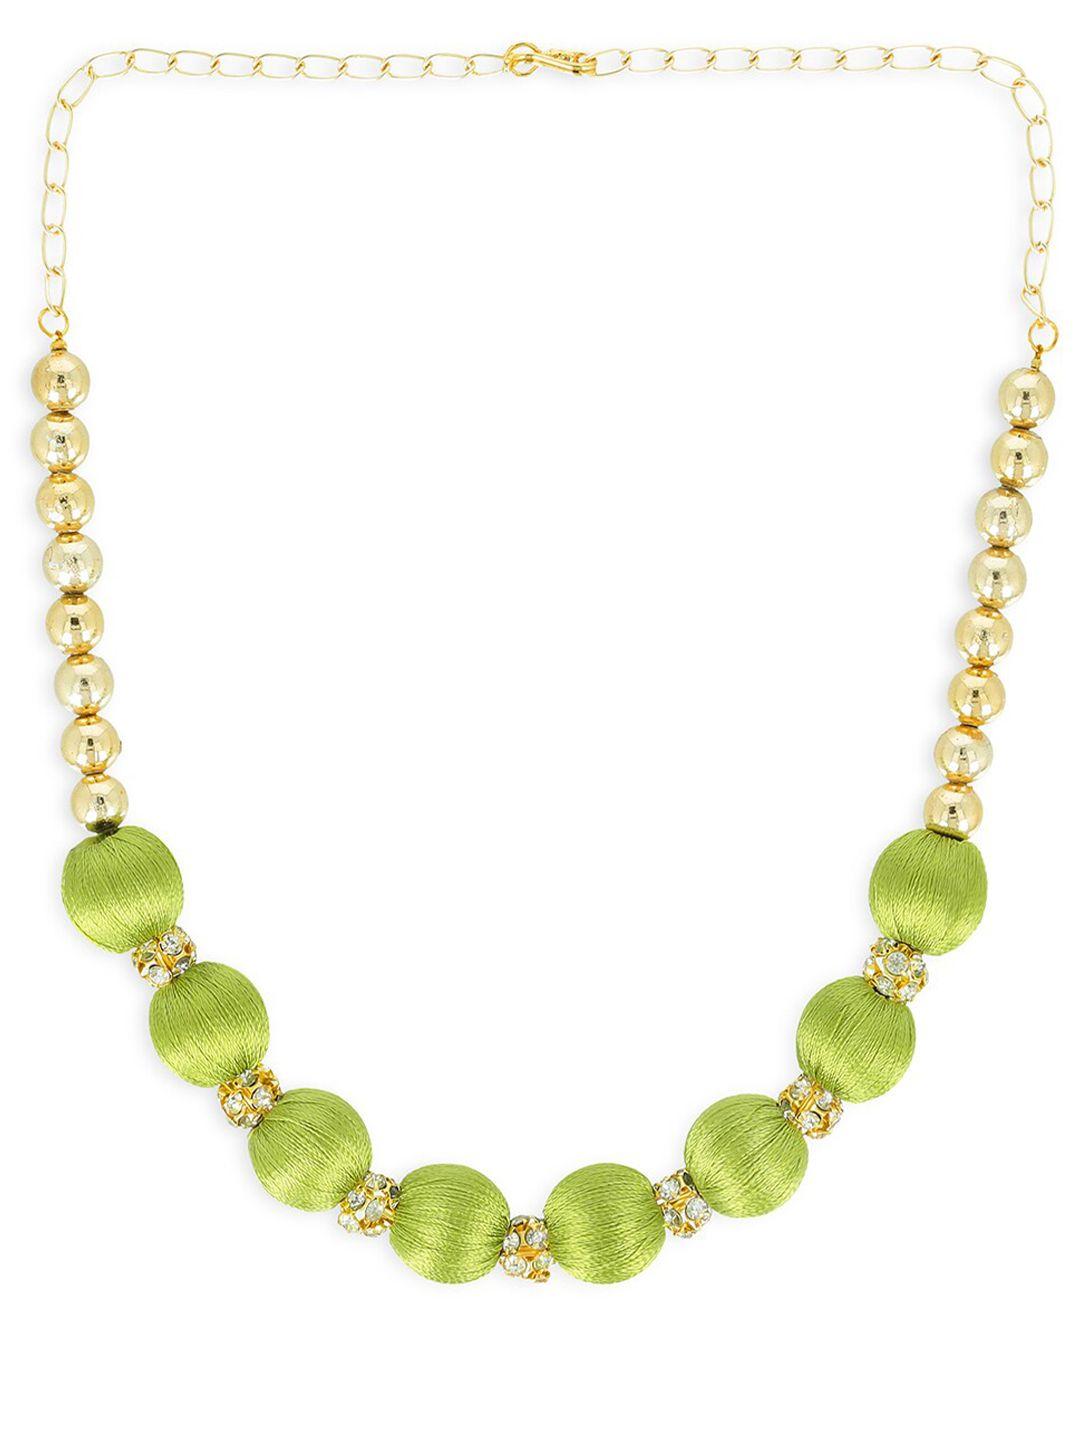 akshara girls gold-toned & green alloy gold-plated handcrafted necklace